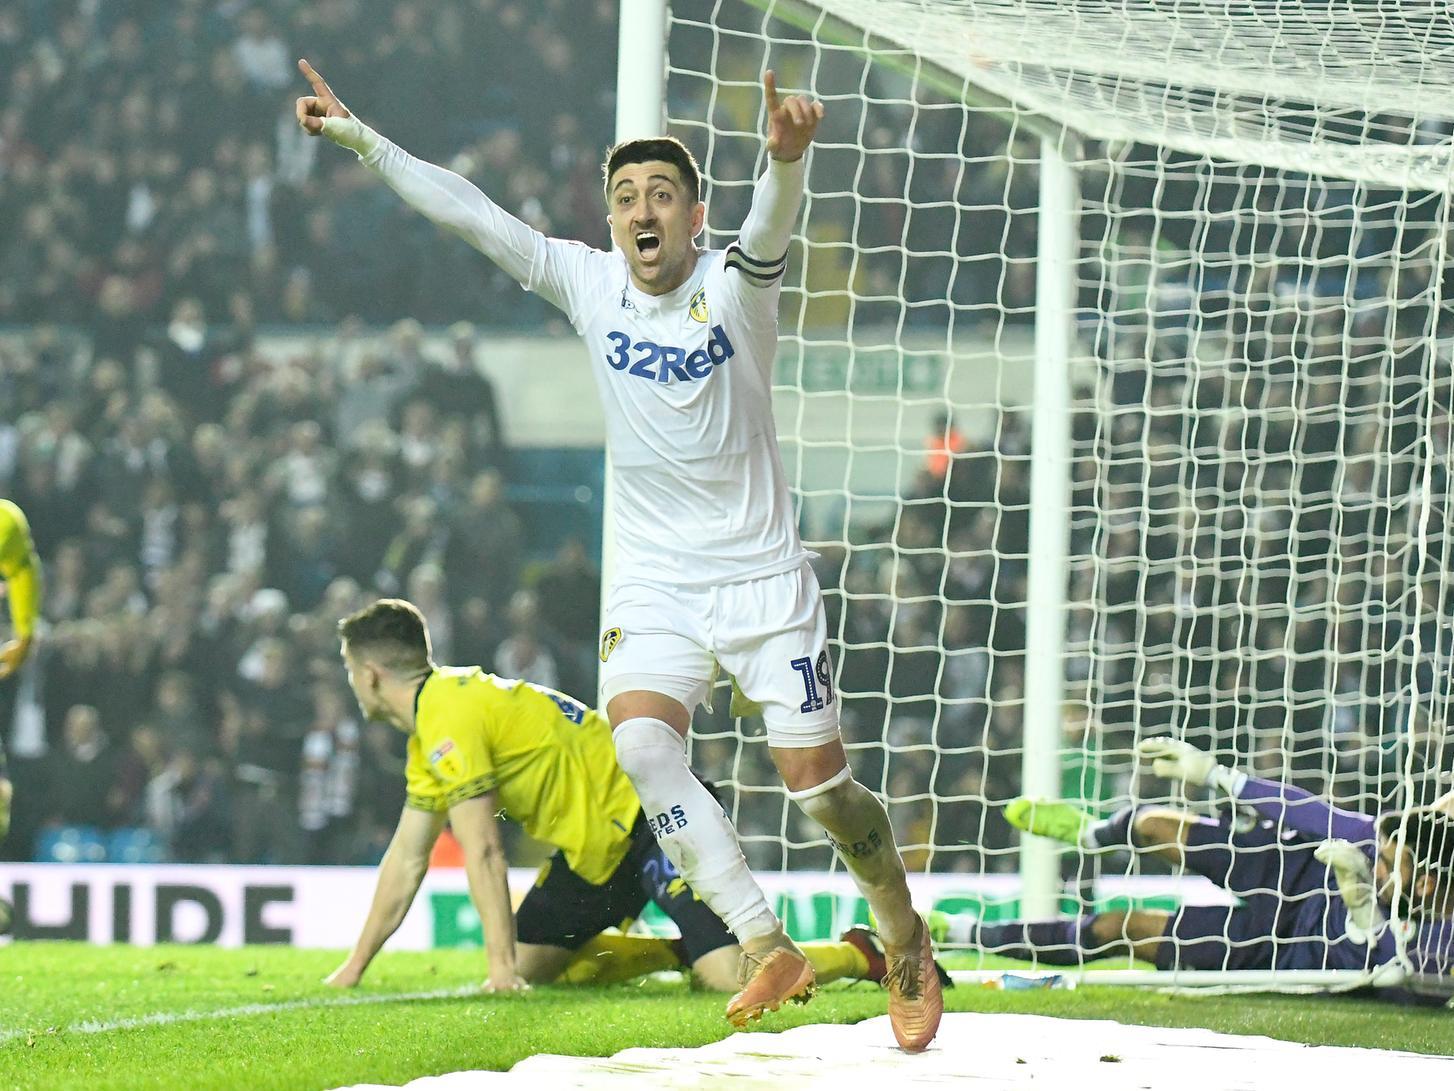 12 goals, 12 assists. Make no mistake about it, the Spaniard was a huge contributor to Leeds' promotion push. It's hard to look past him when naming the best creative player in the league.